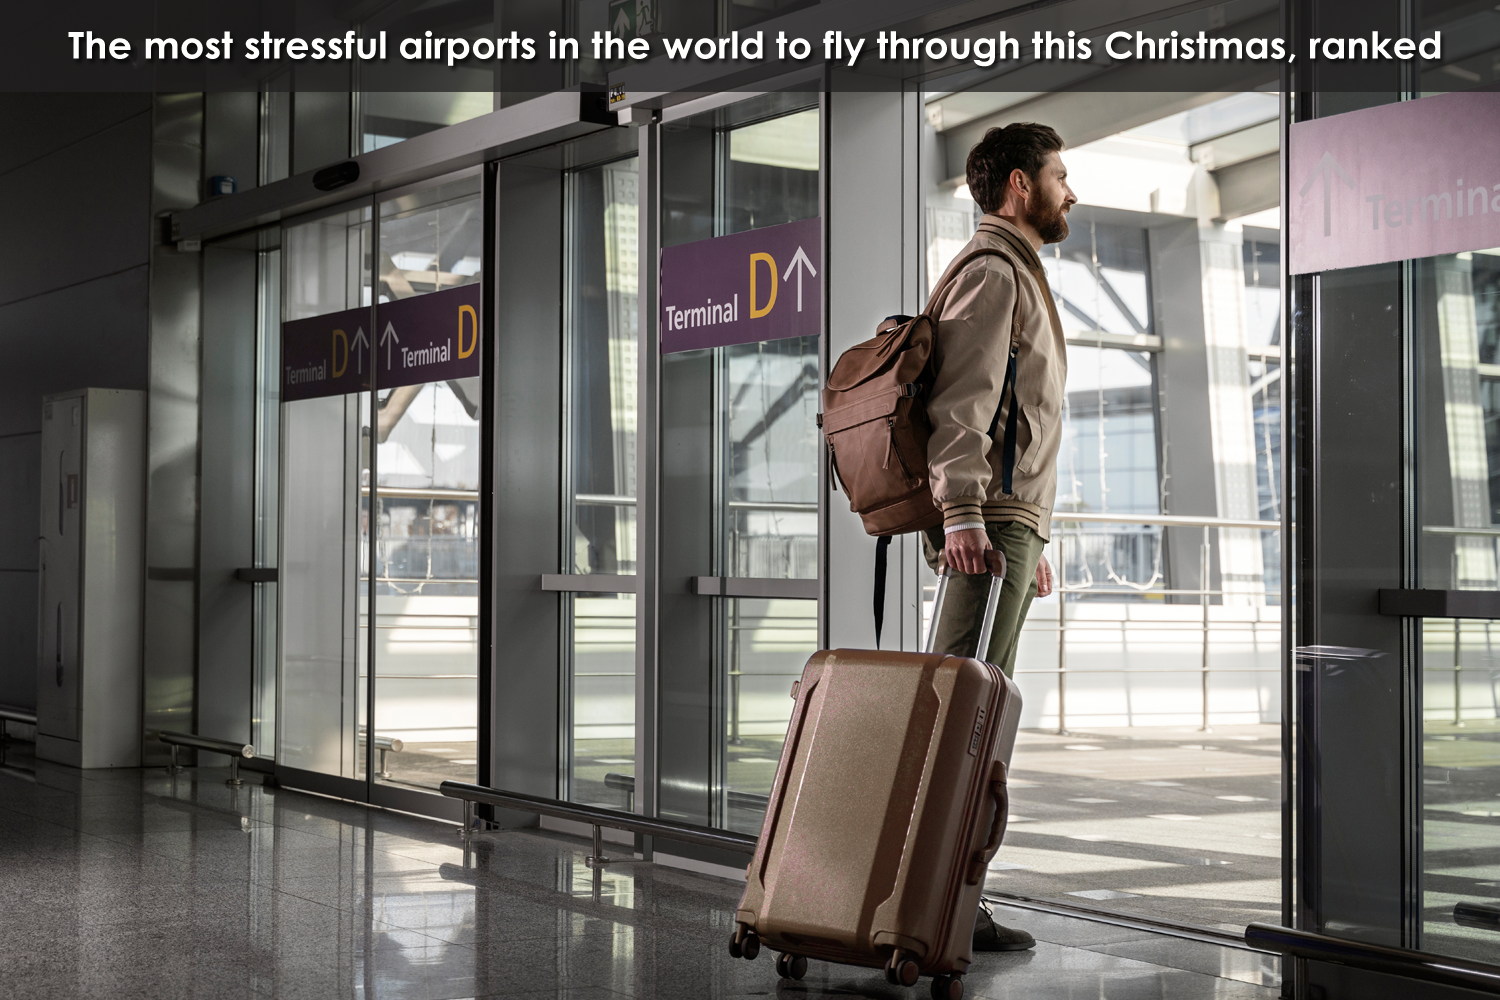 The most stressful airports in the world to fly through this Christmas, ranked